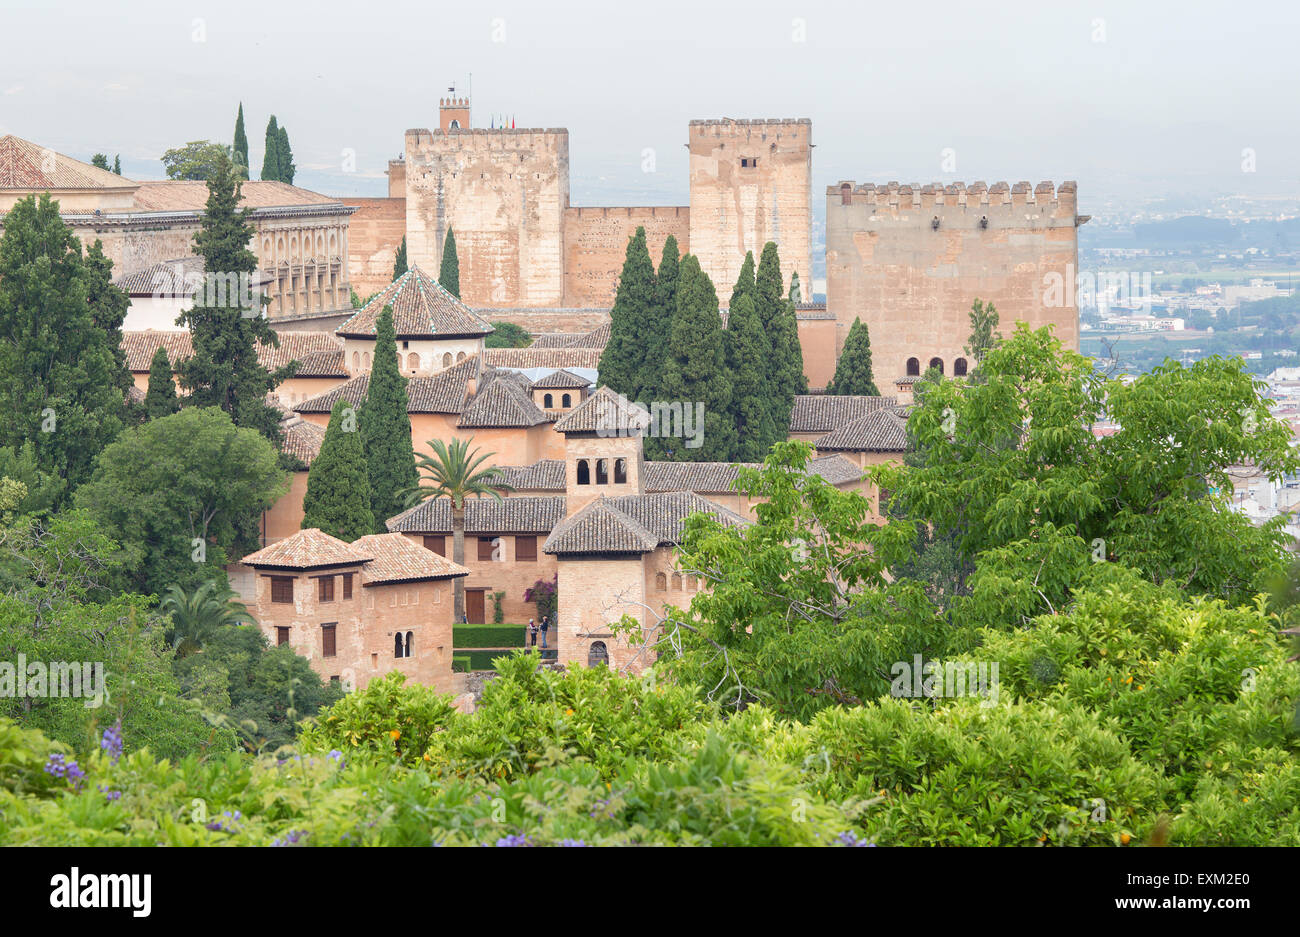 Granada - The outlook over the Alhambra from Generalife gardens. Stock Photo